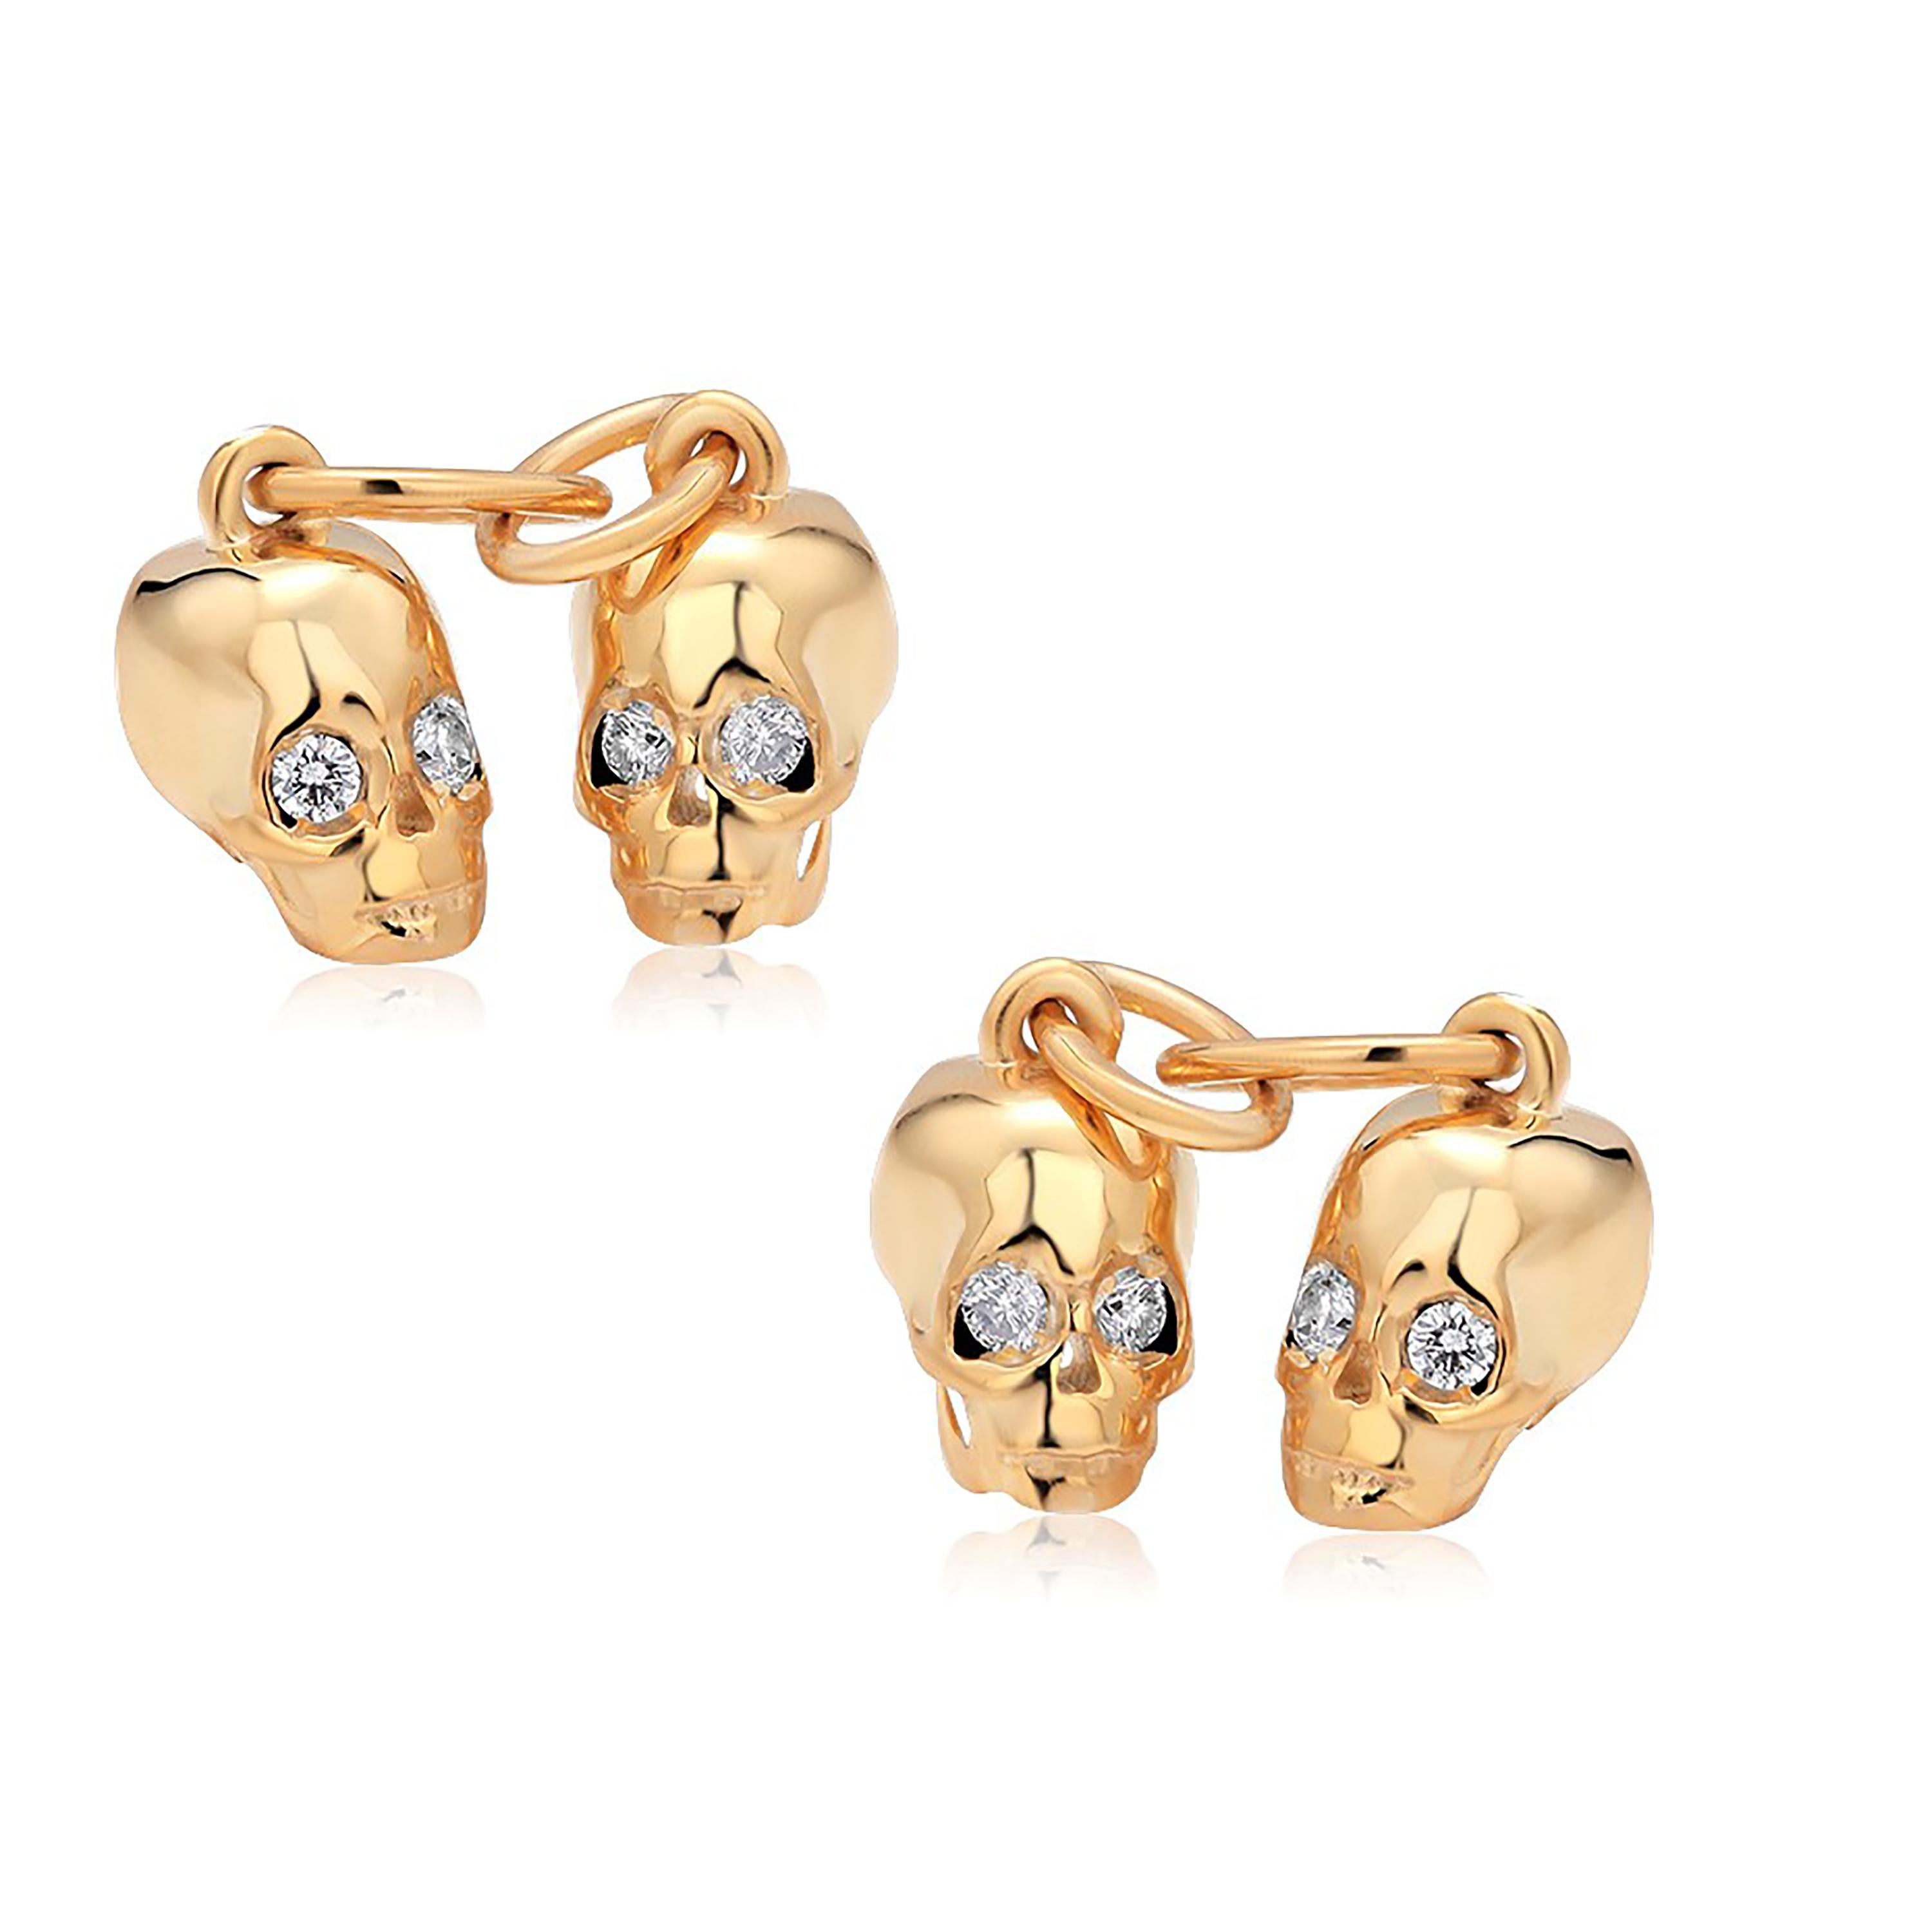 Modern Genuine Diamond Skull Charms Double Sided Silver Cufflinks Yellow Gold-Plated